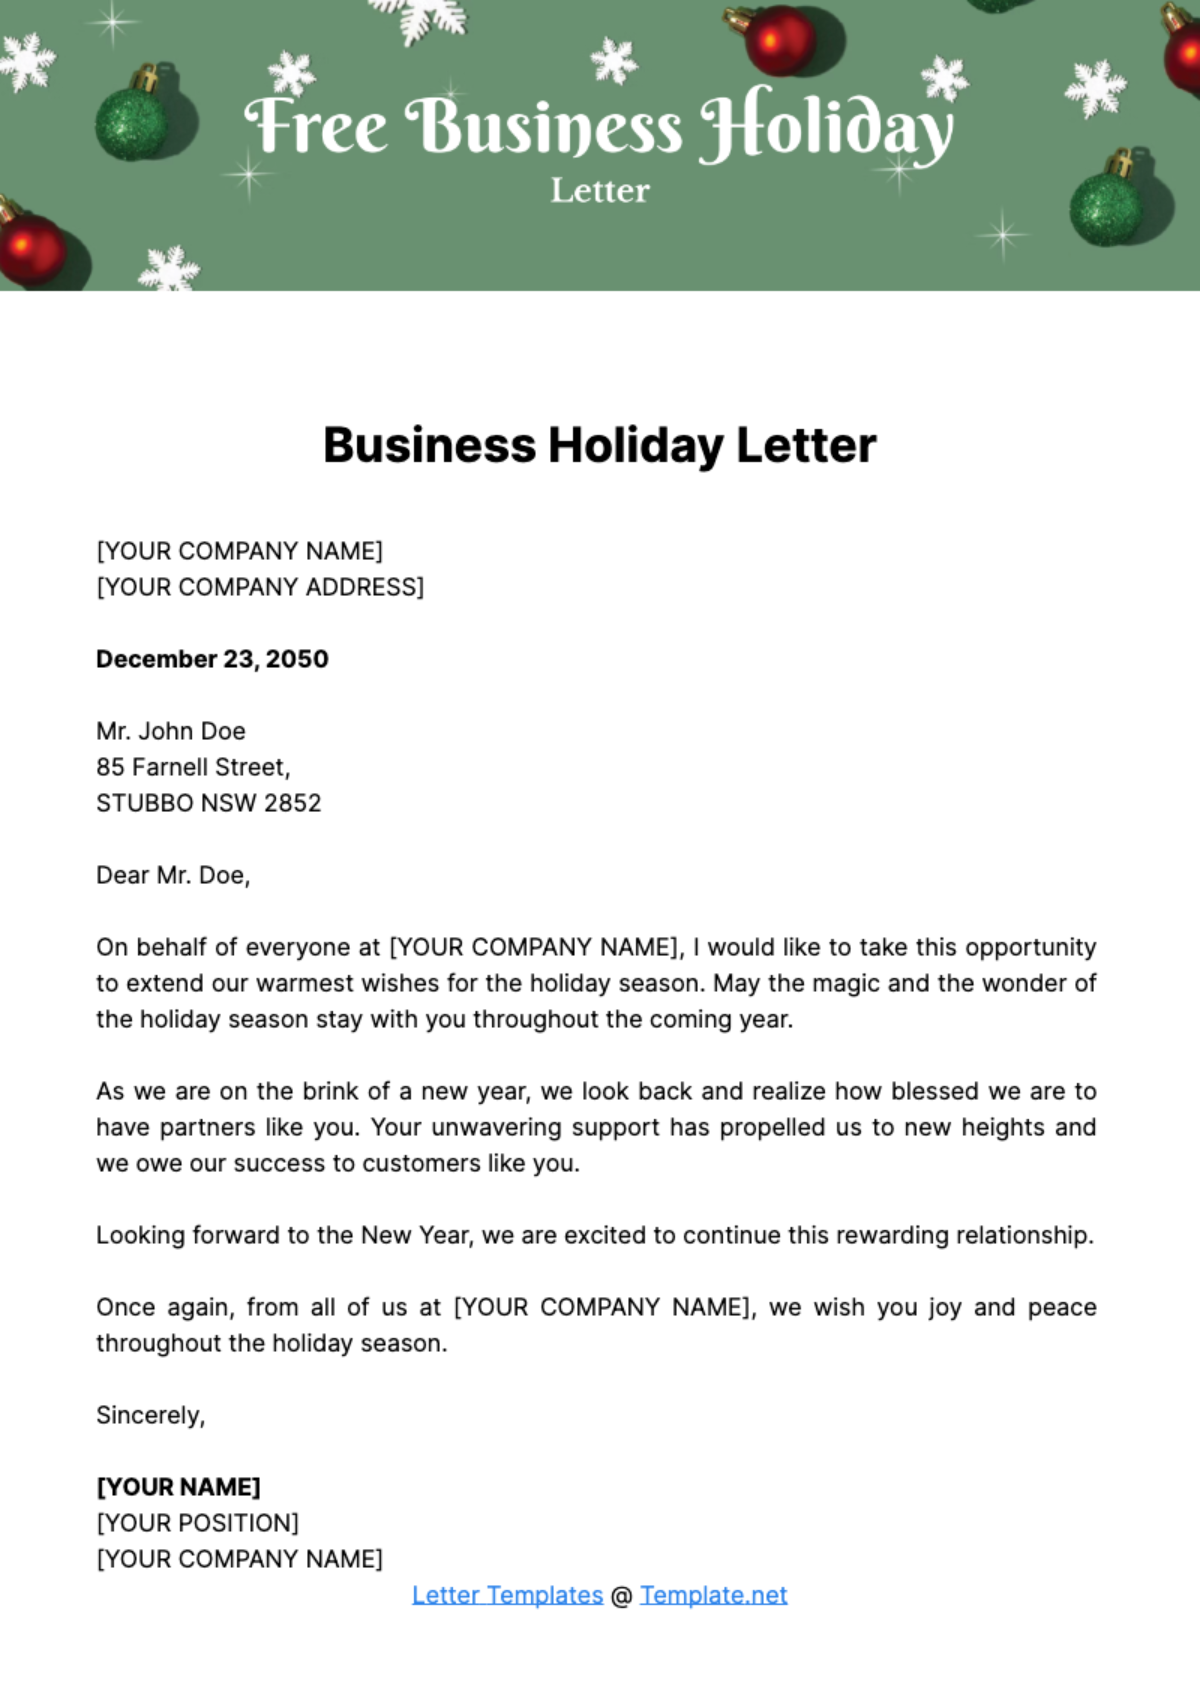 Business Holiday Letter Template